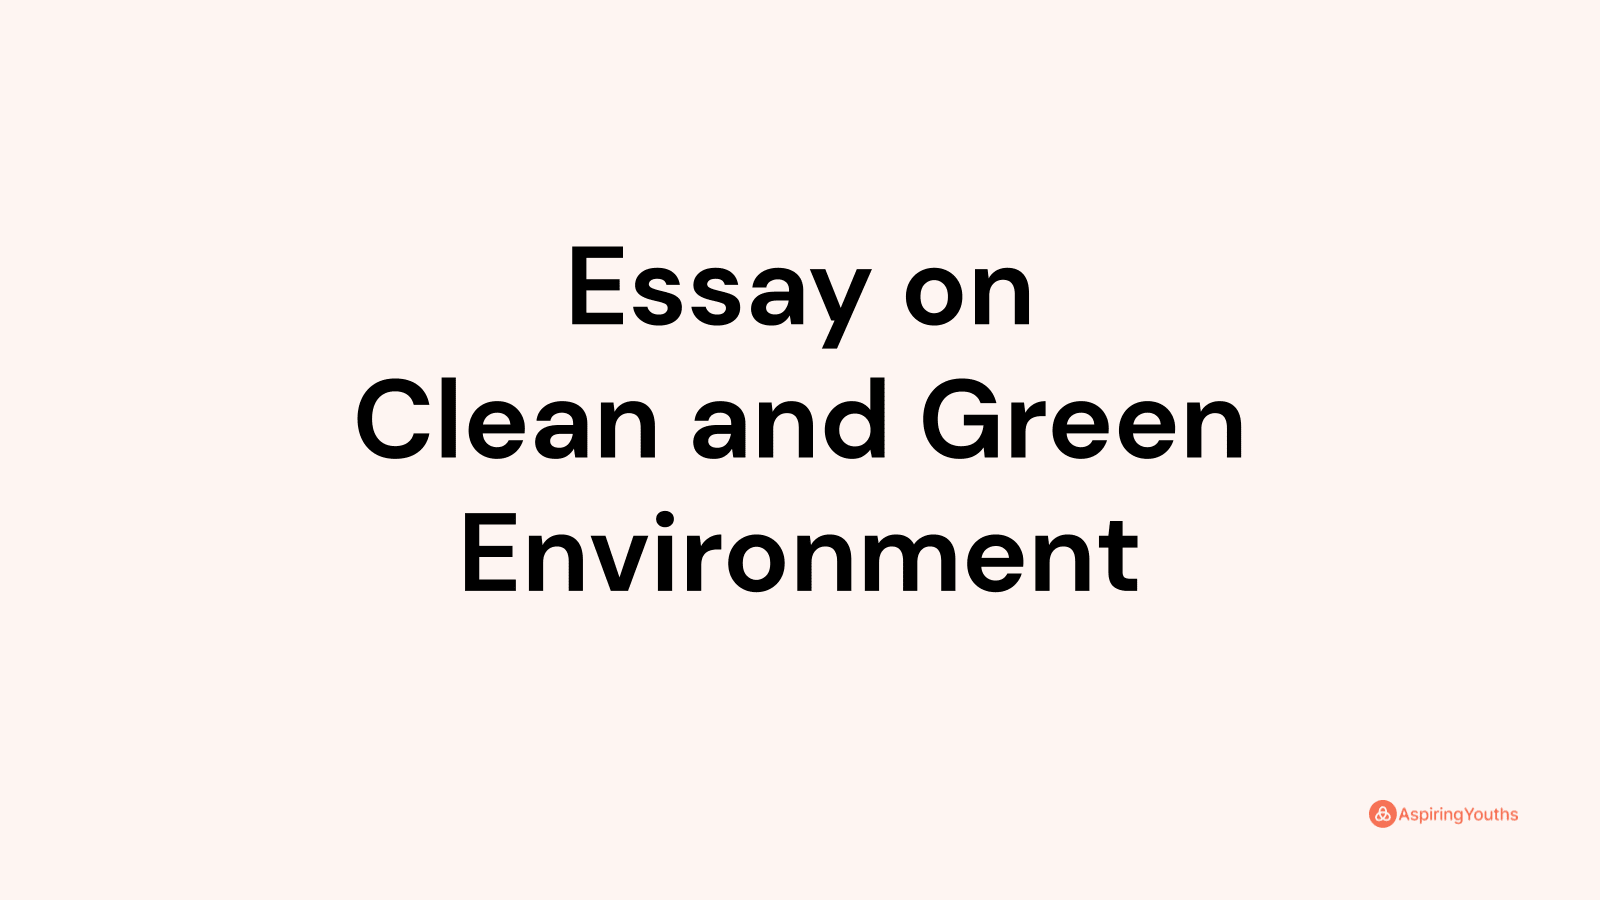 essay on clean and green environment in 300 words